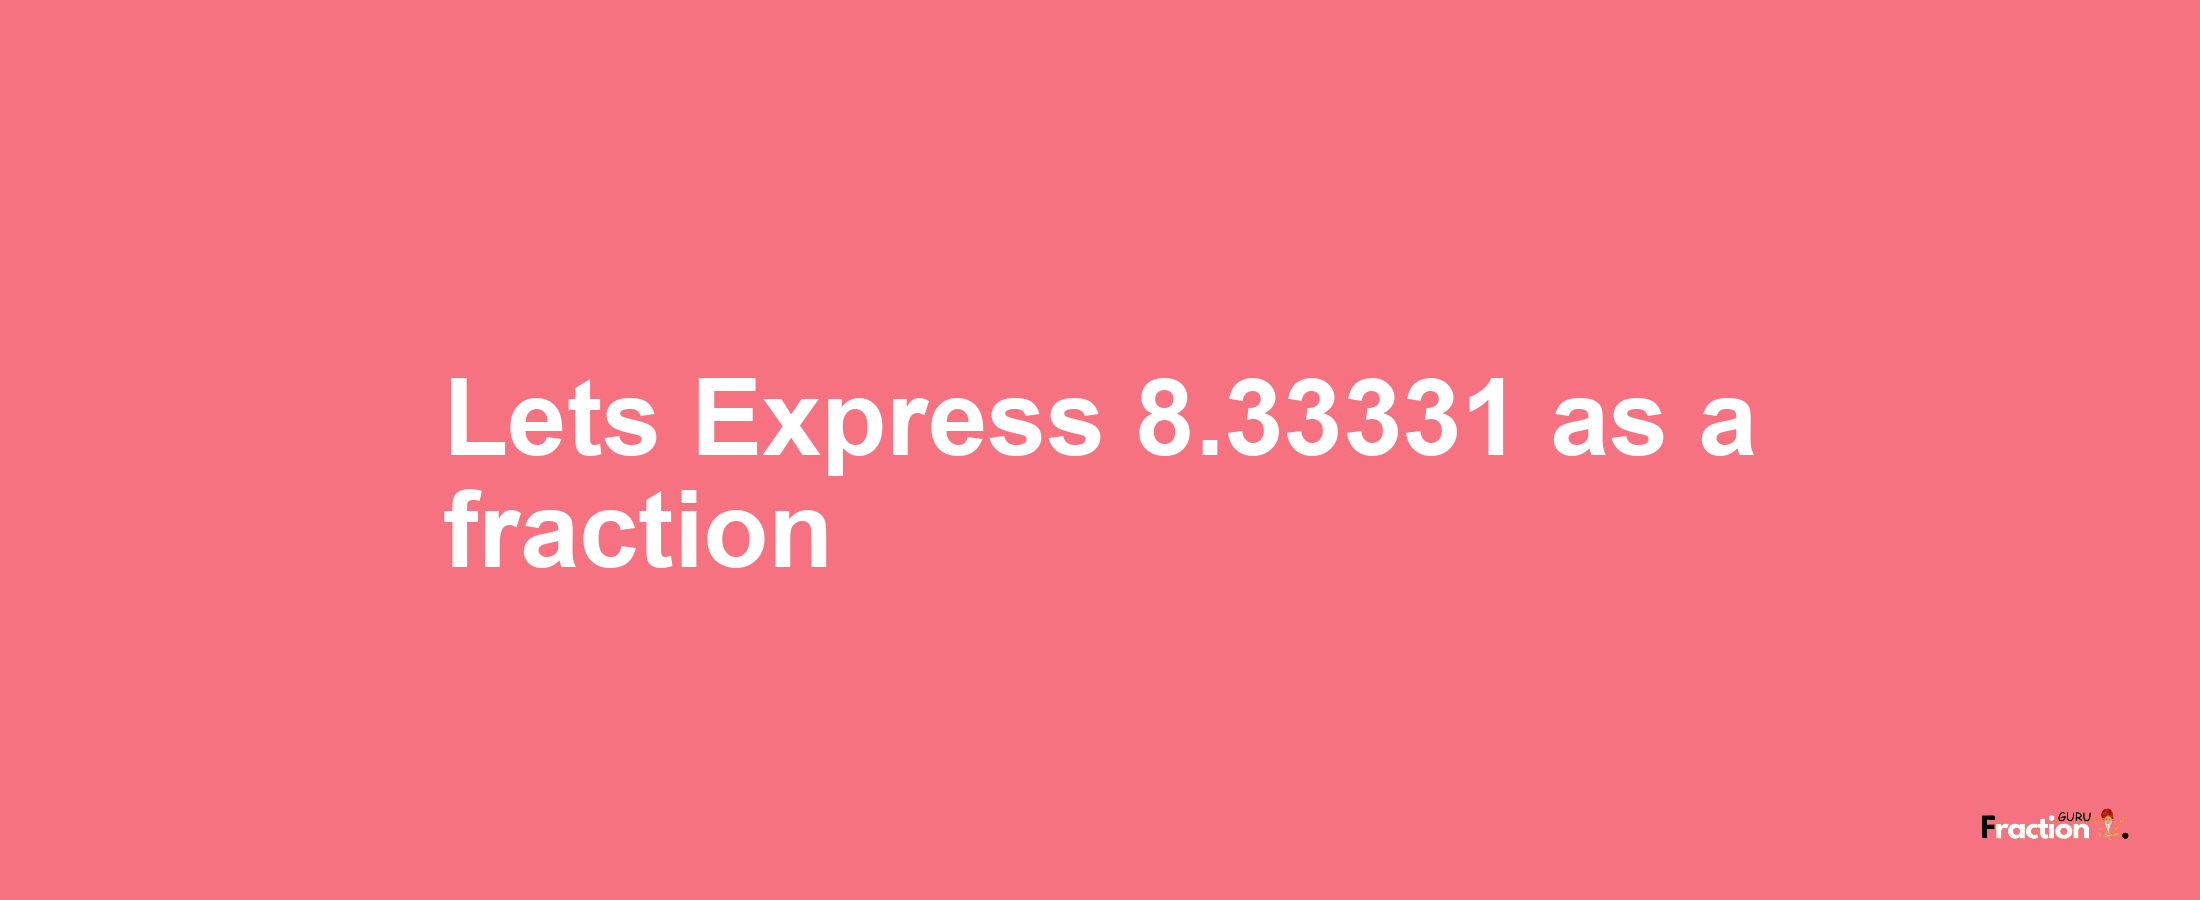 Lets Express 8.33331 as afraction